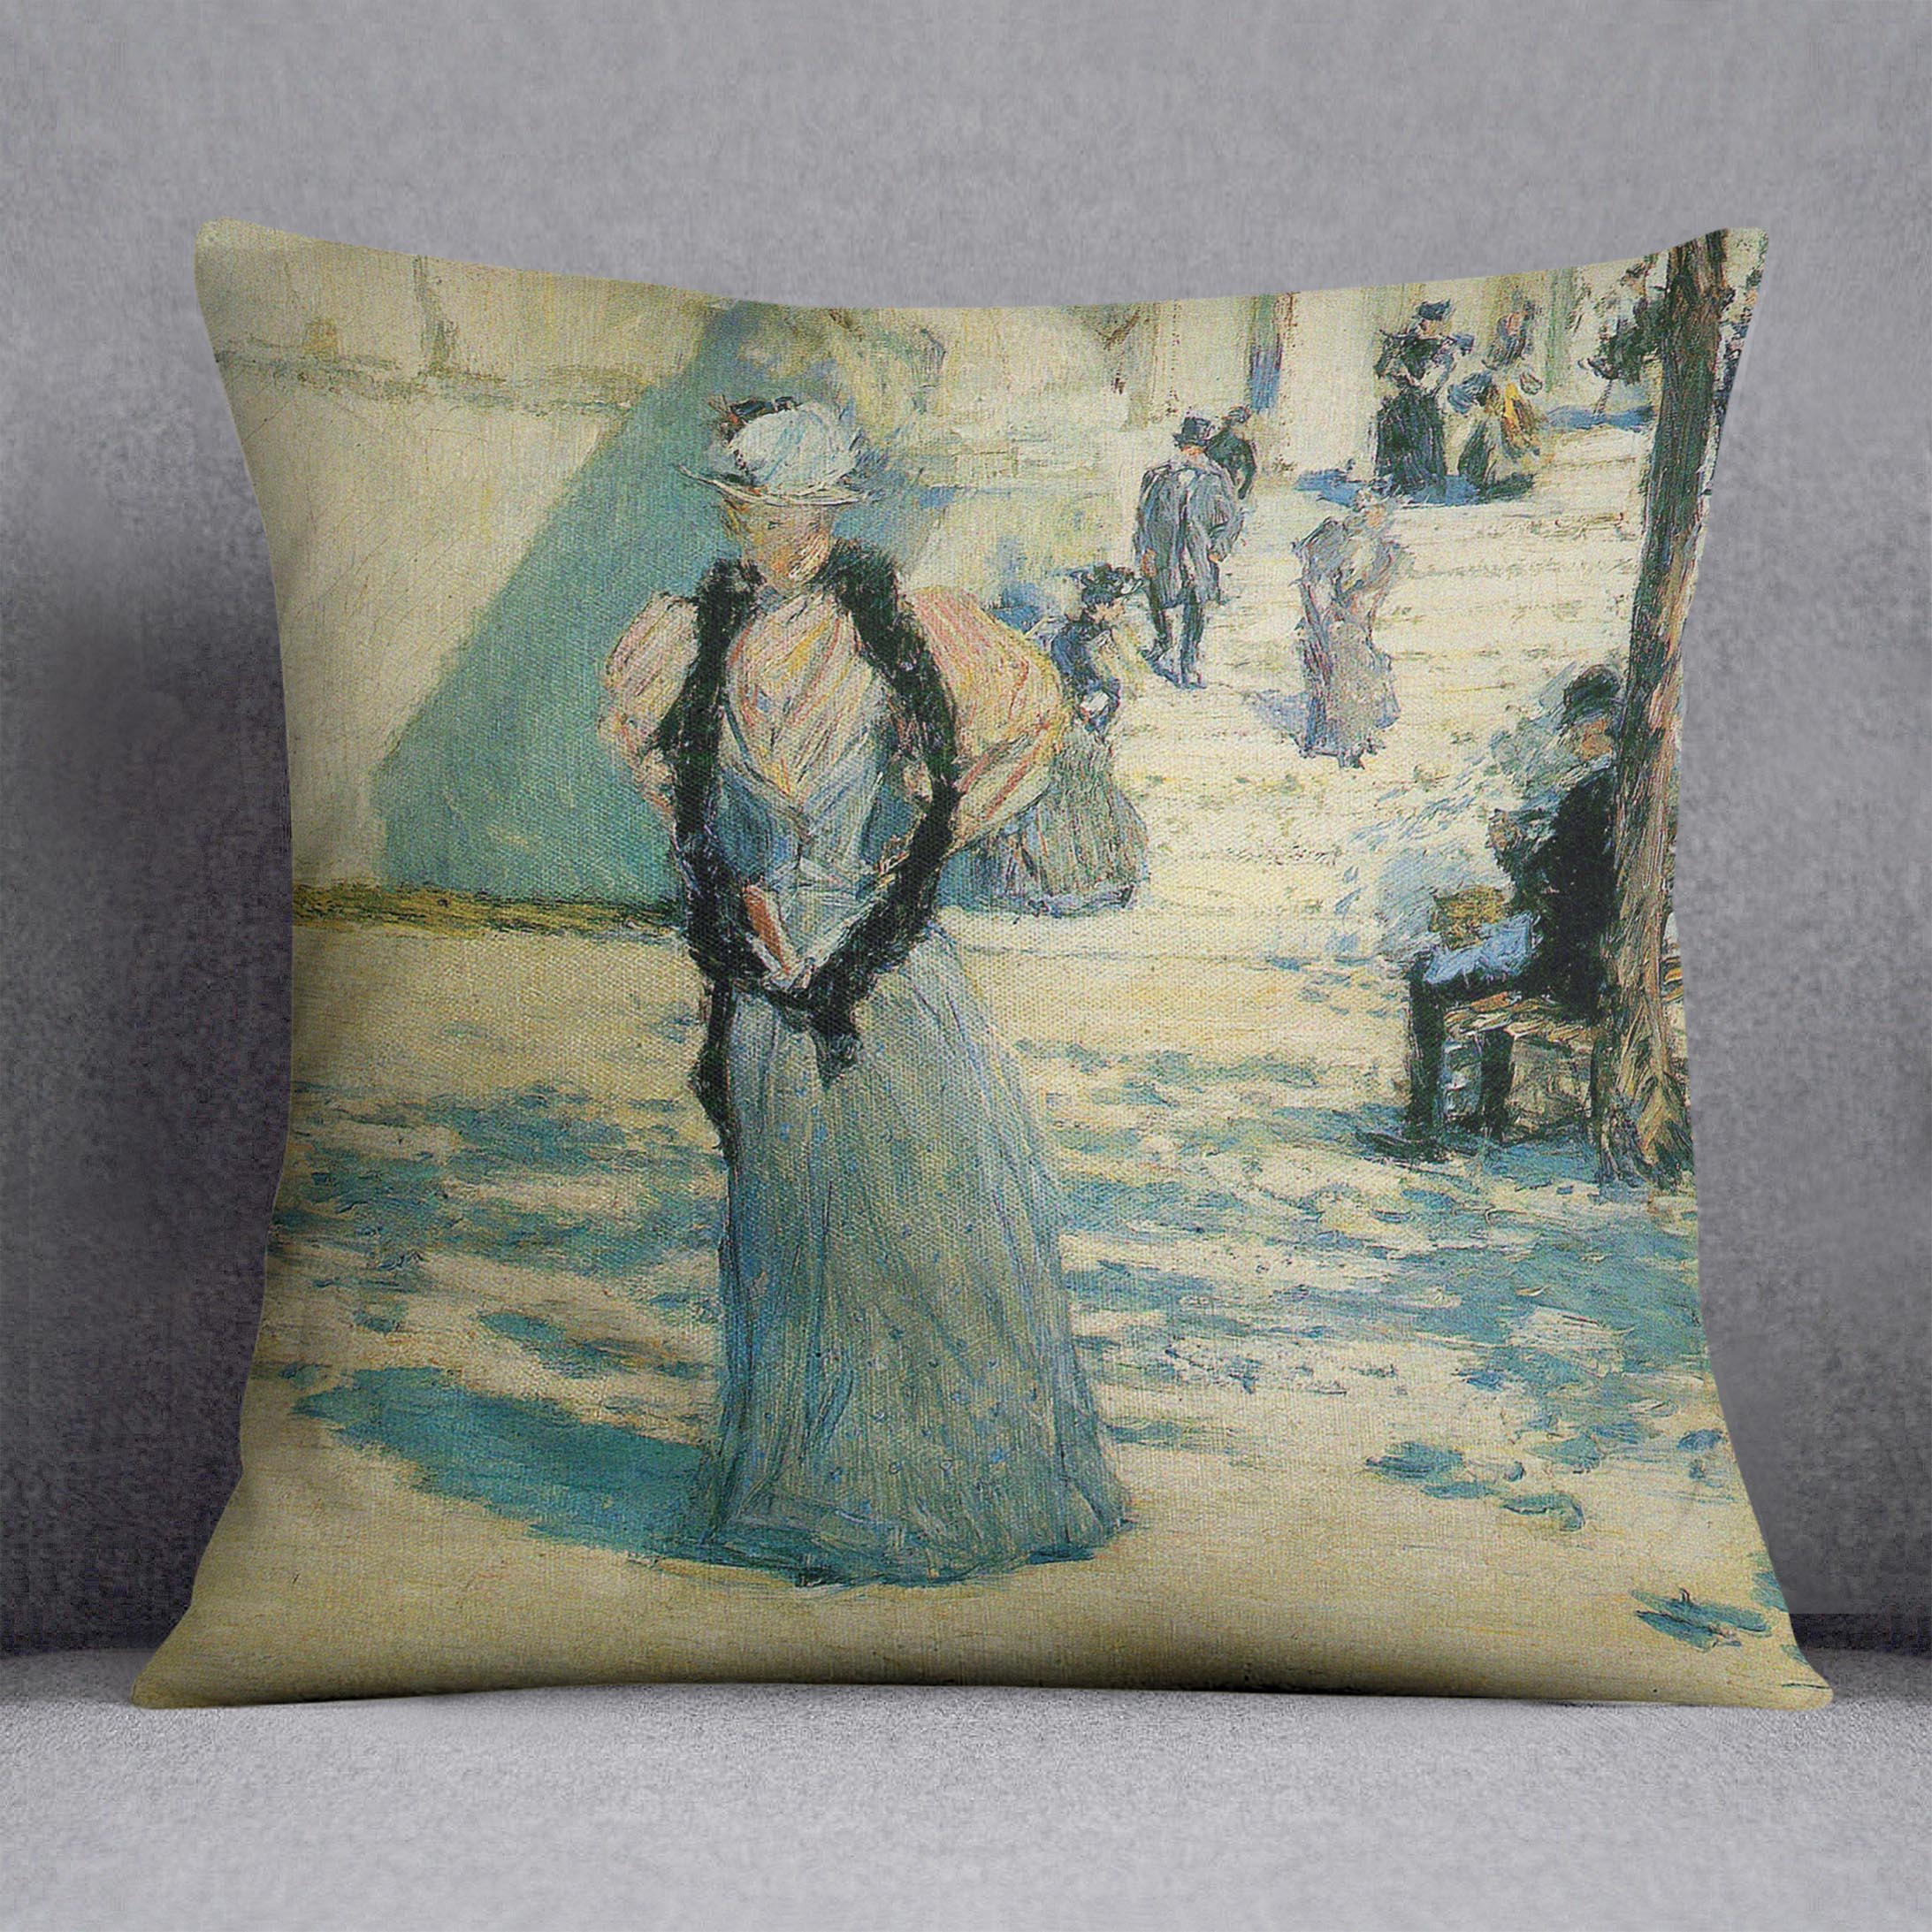 Characters in the sunlight by Hassam Cushion - Canvas Art Rocks - 1